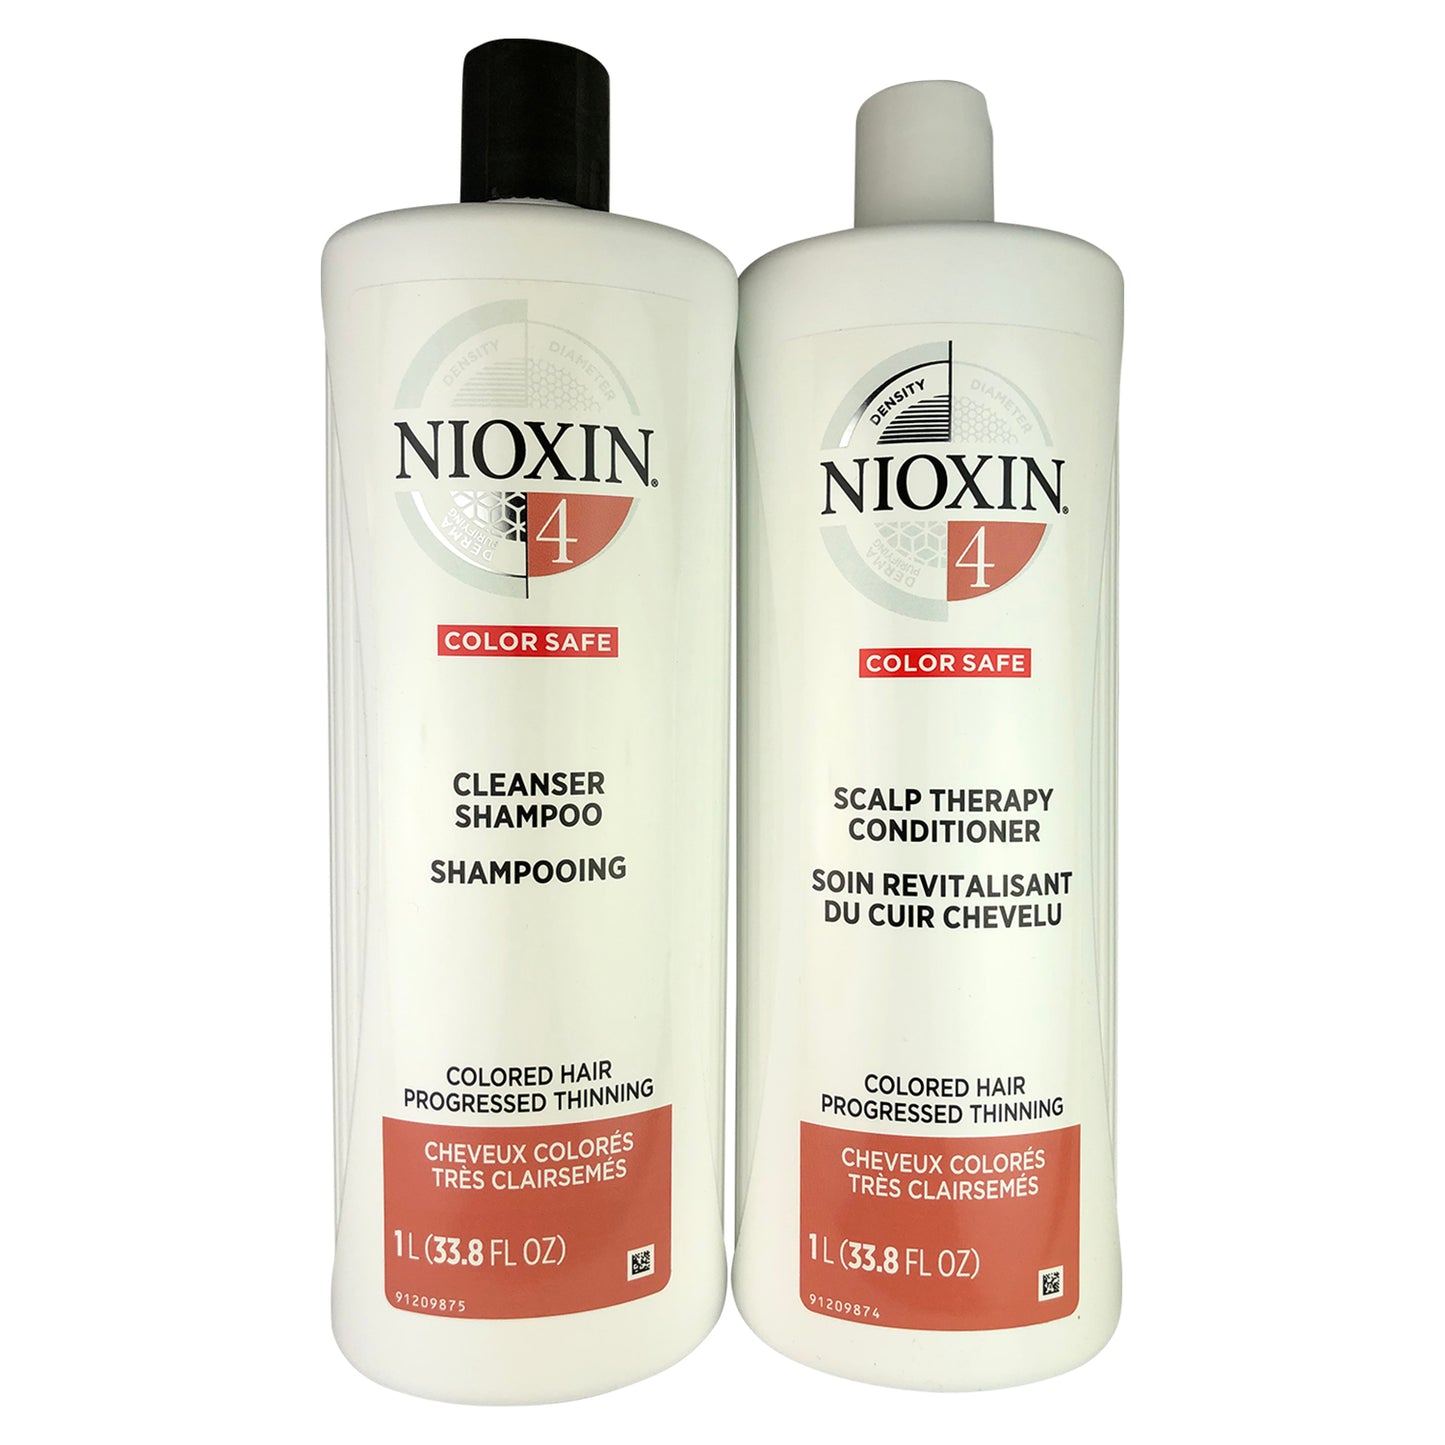 Nioxin System 4 Duo (Cleanser Shampoo and Scalp Therapy Conditioner)